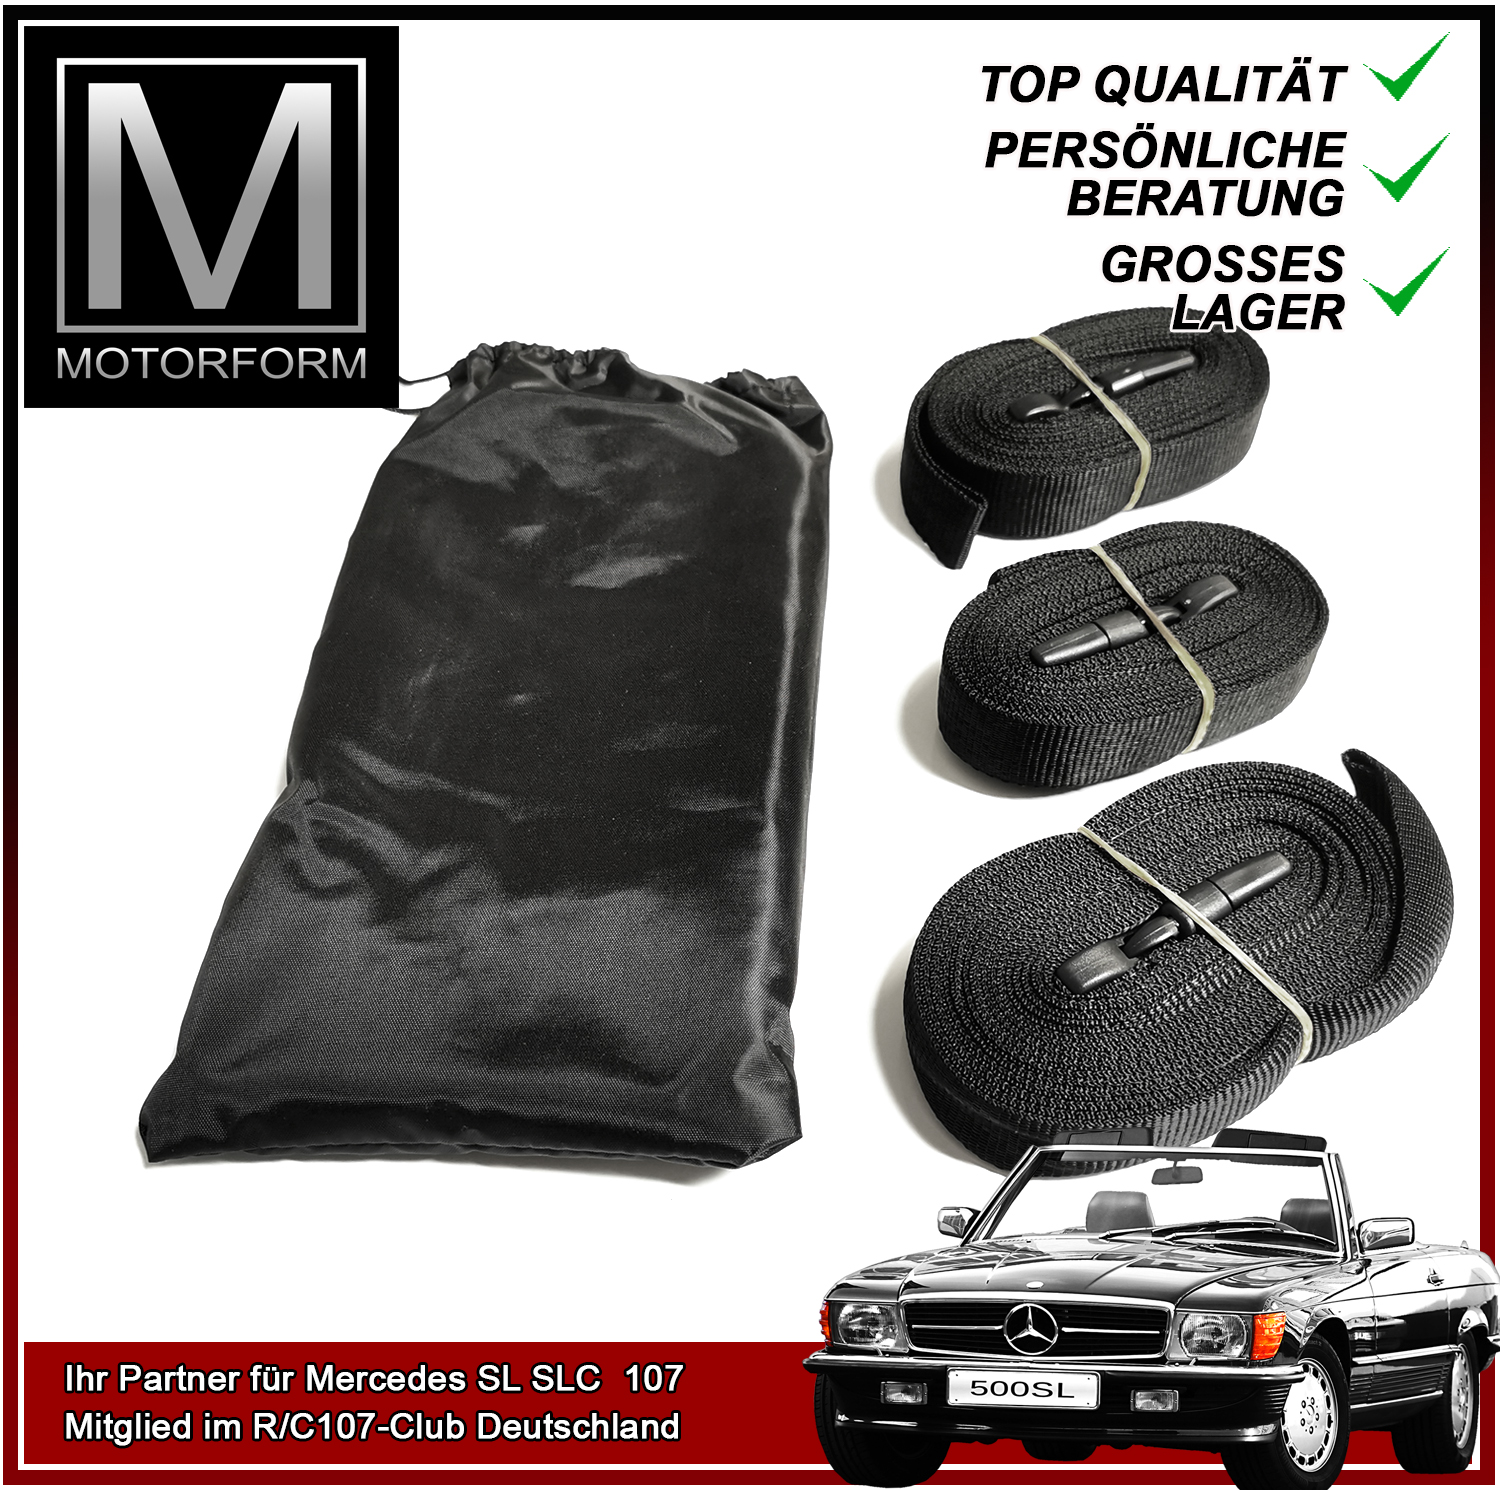 3 Pieces Over Body Strap Set for MG Montego